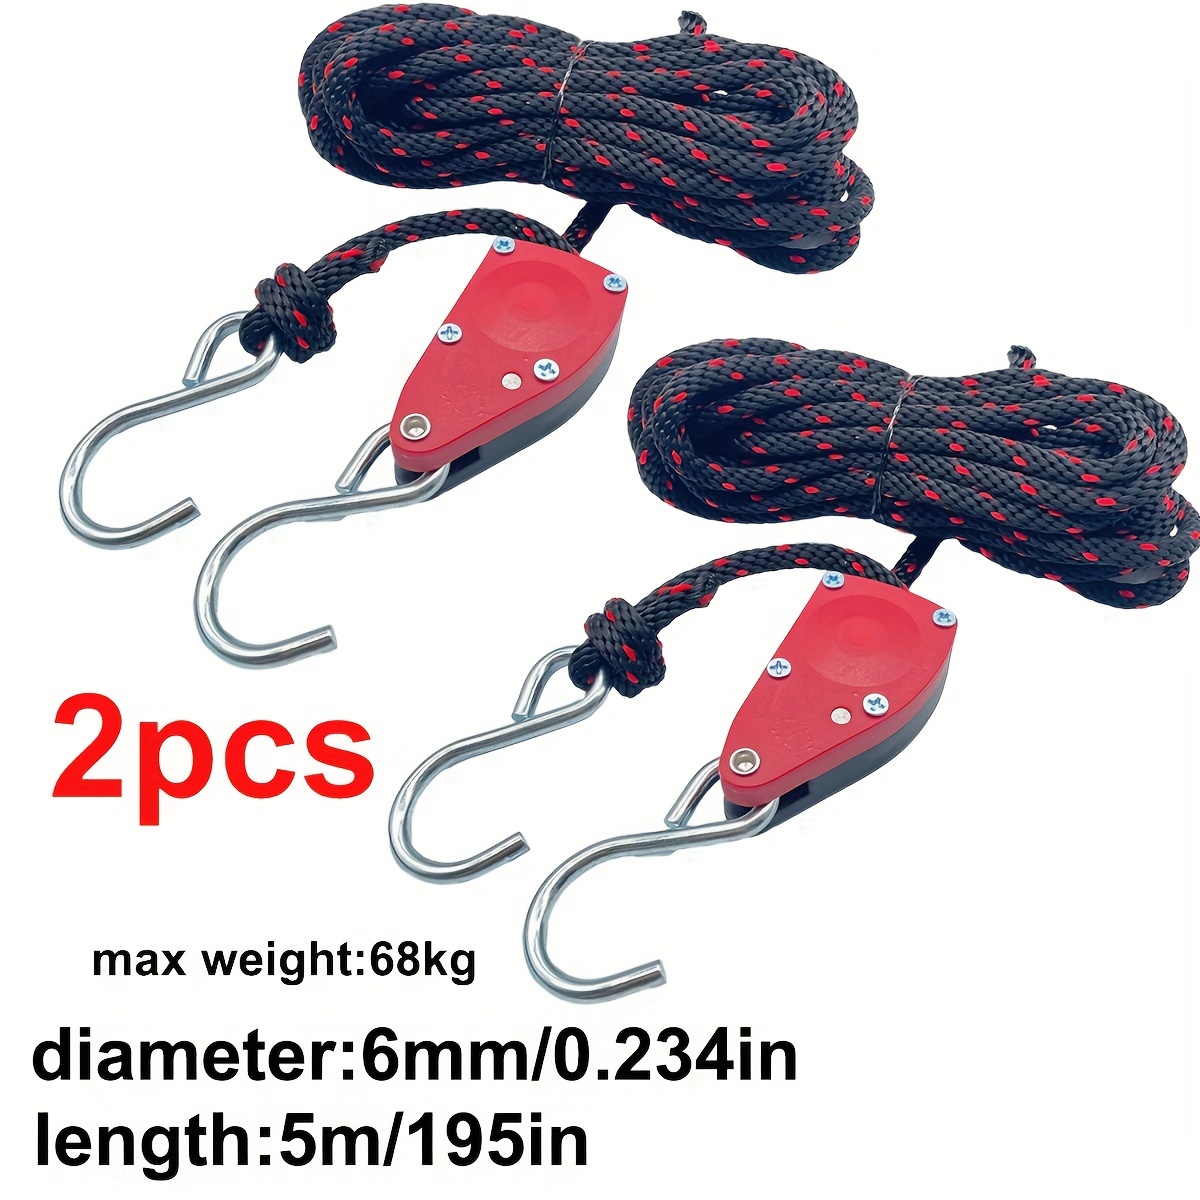 2pcs 6mm 5m Max Weight 68kg Hook Rope Pulley Adjuster With Tent Rope  Camping Tent Tie Down Rope Canopy Awning Rope Hook, Shop The Latest Trends